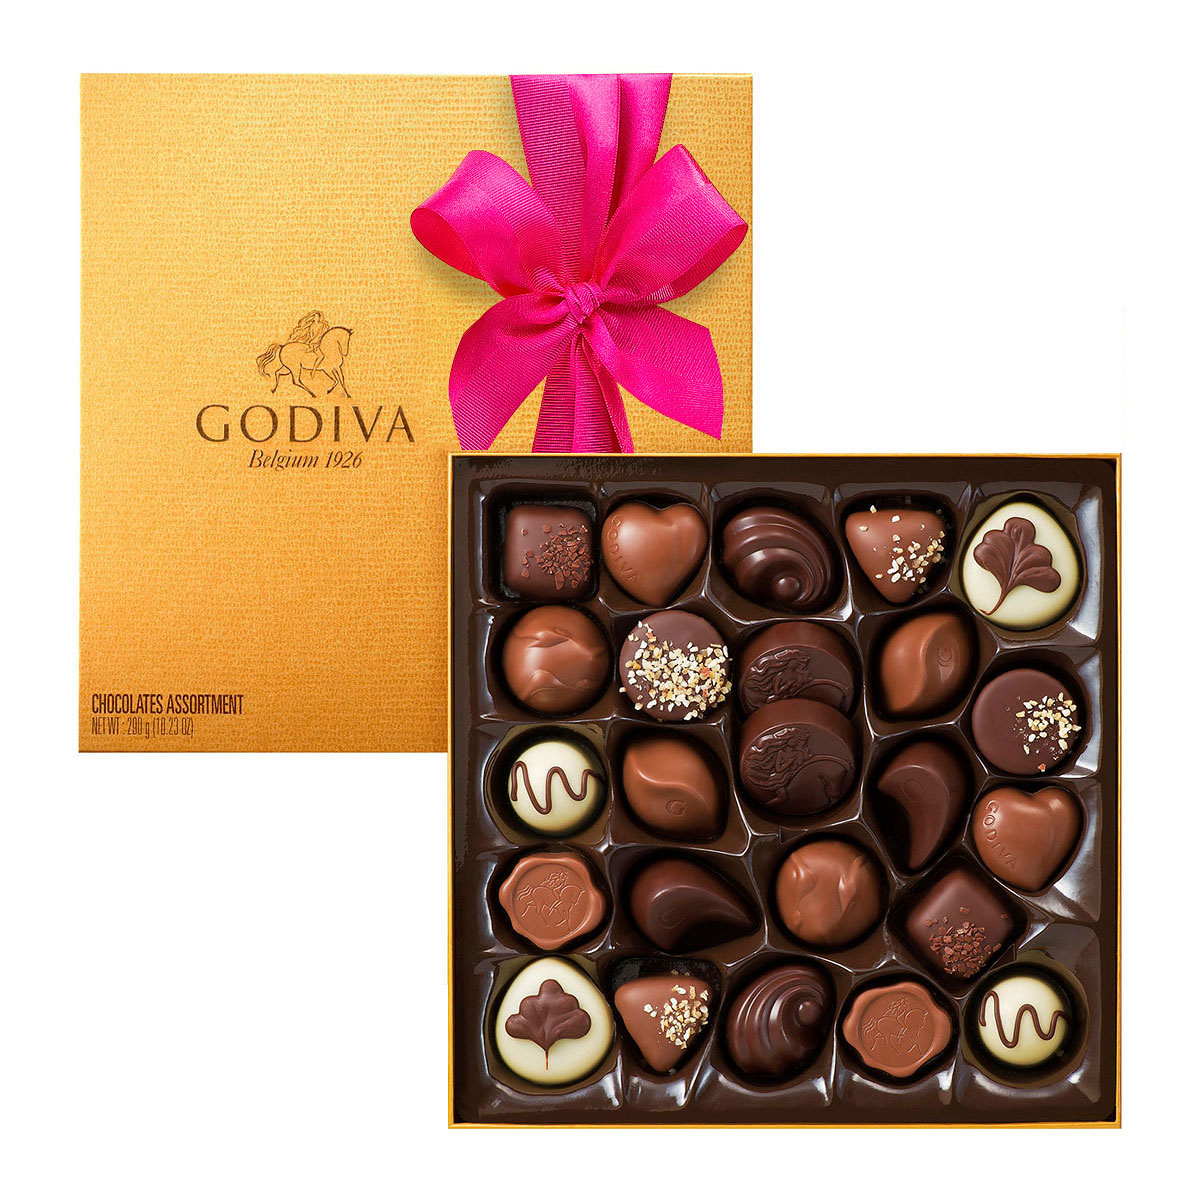 Godiva Romantic Gift Box for Her - Delivery in Belgium by GiftsForEurope.